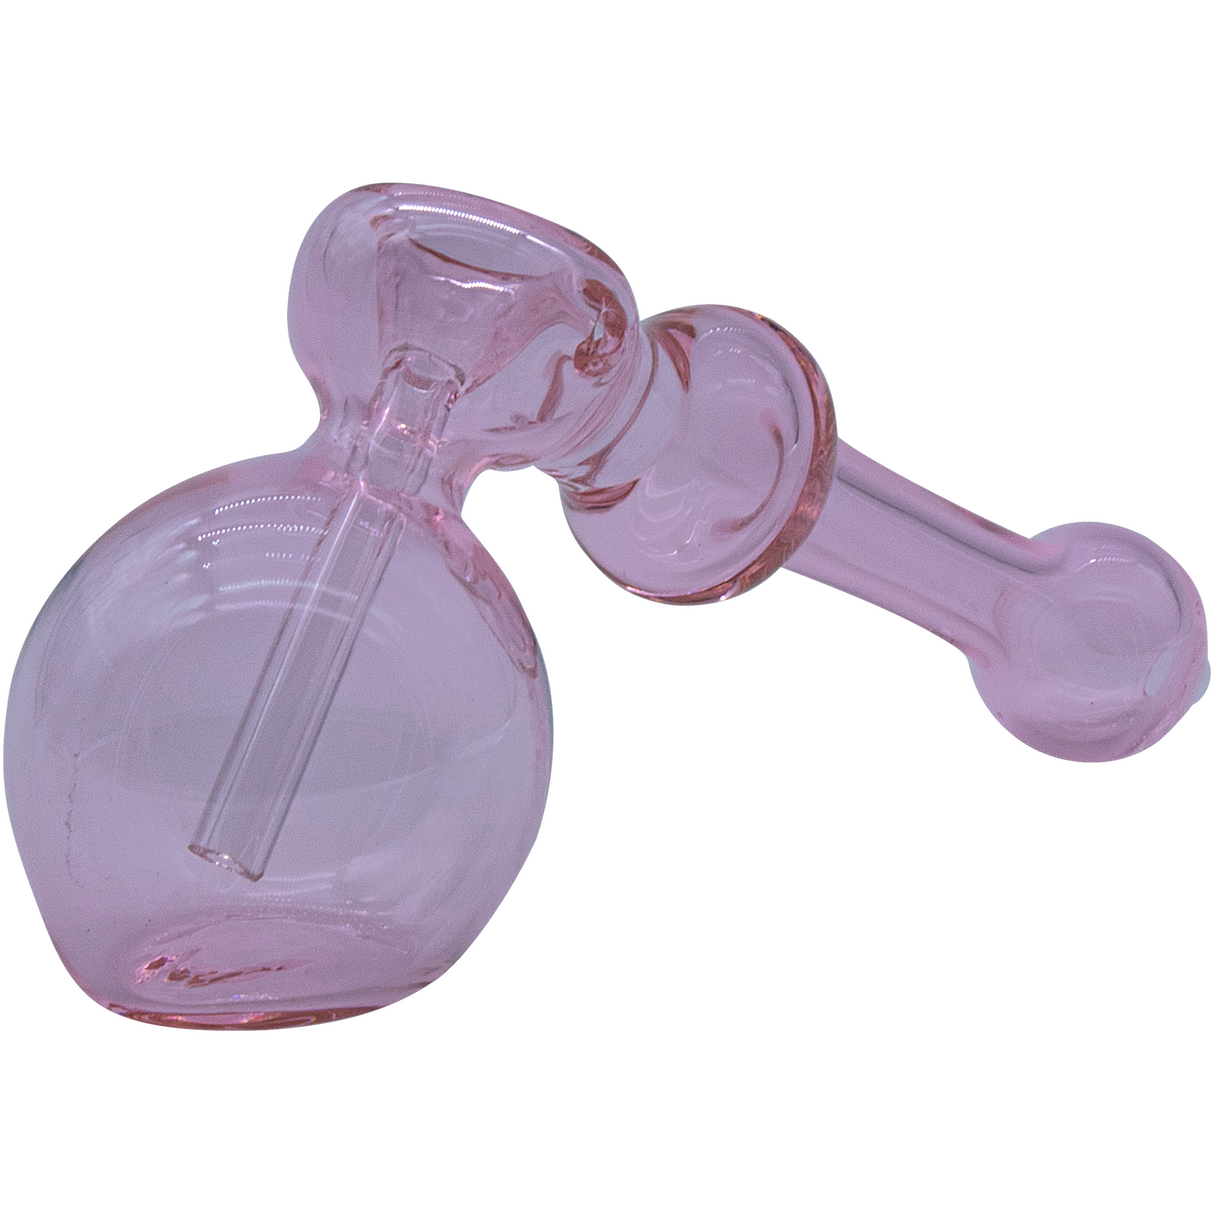 LA Pipes Glass Hammer Bubbler Pipe in Translucent Pink, 6" Borosilicate, Side View